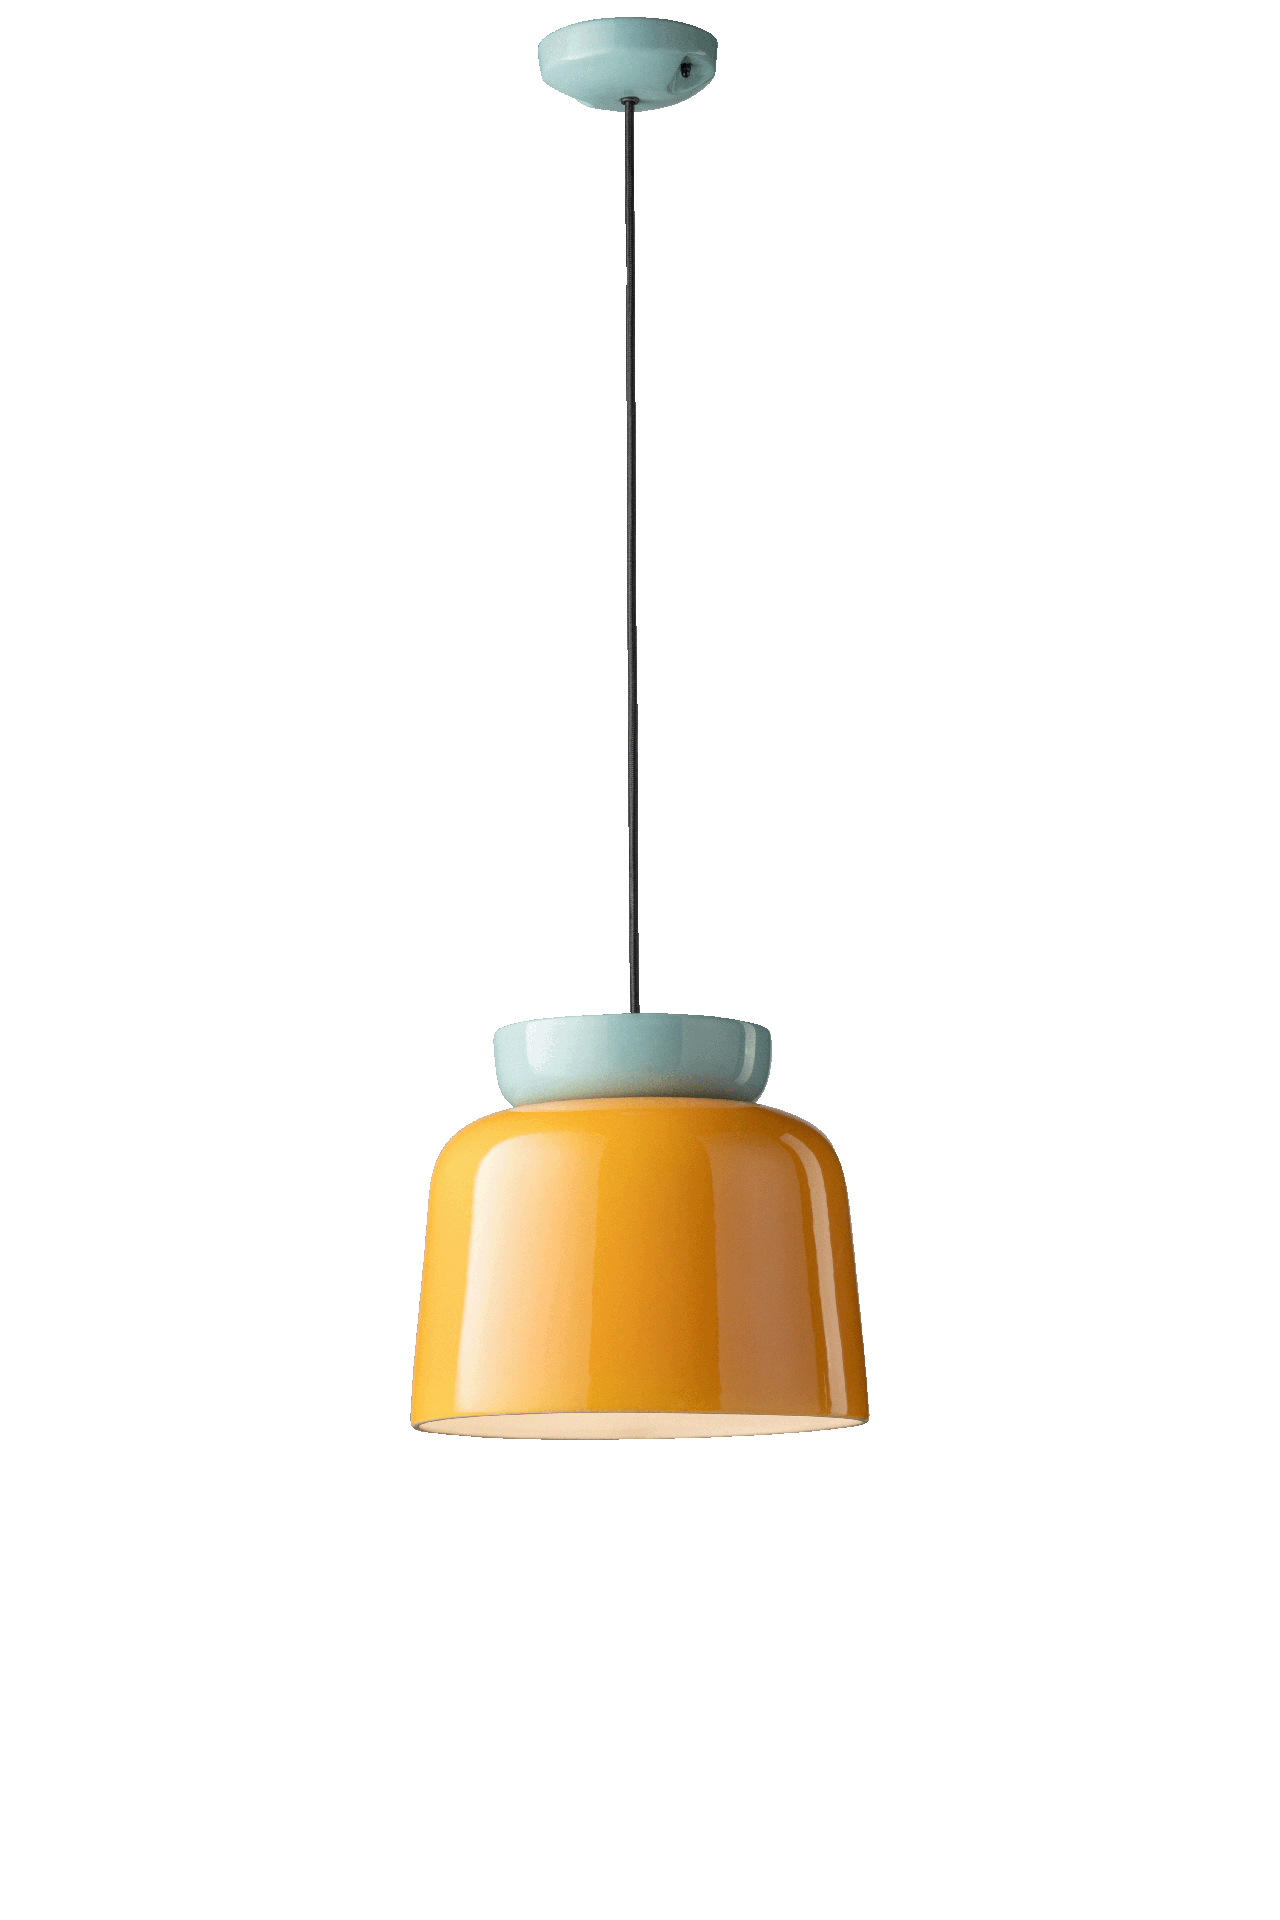 Tropical Style Kitchen lights Yellow glossy